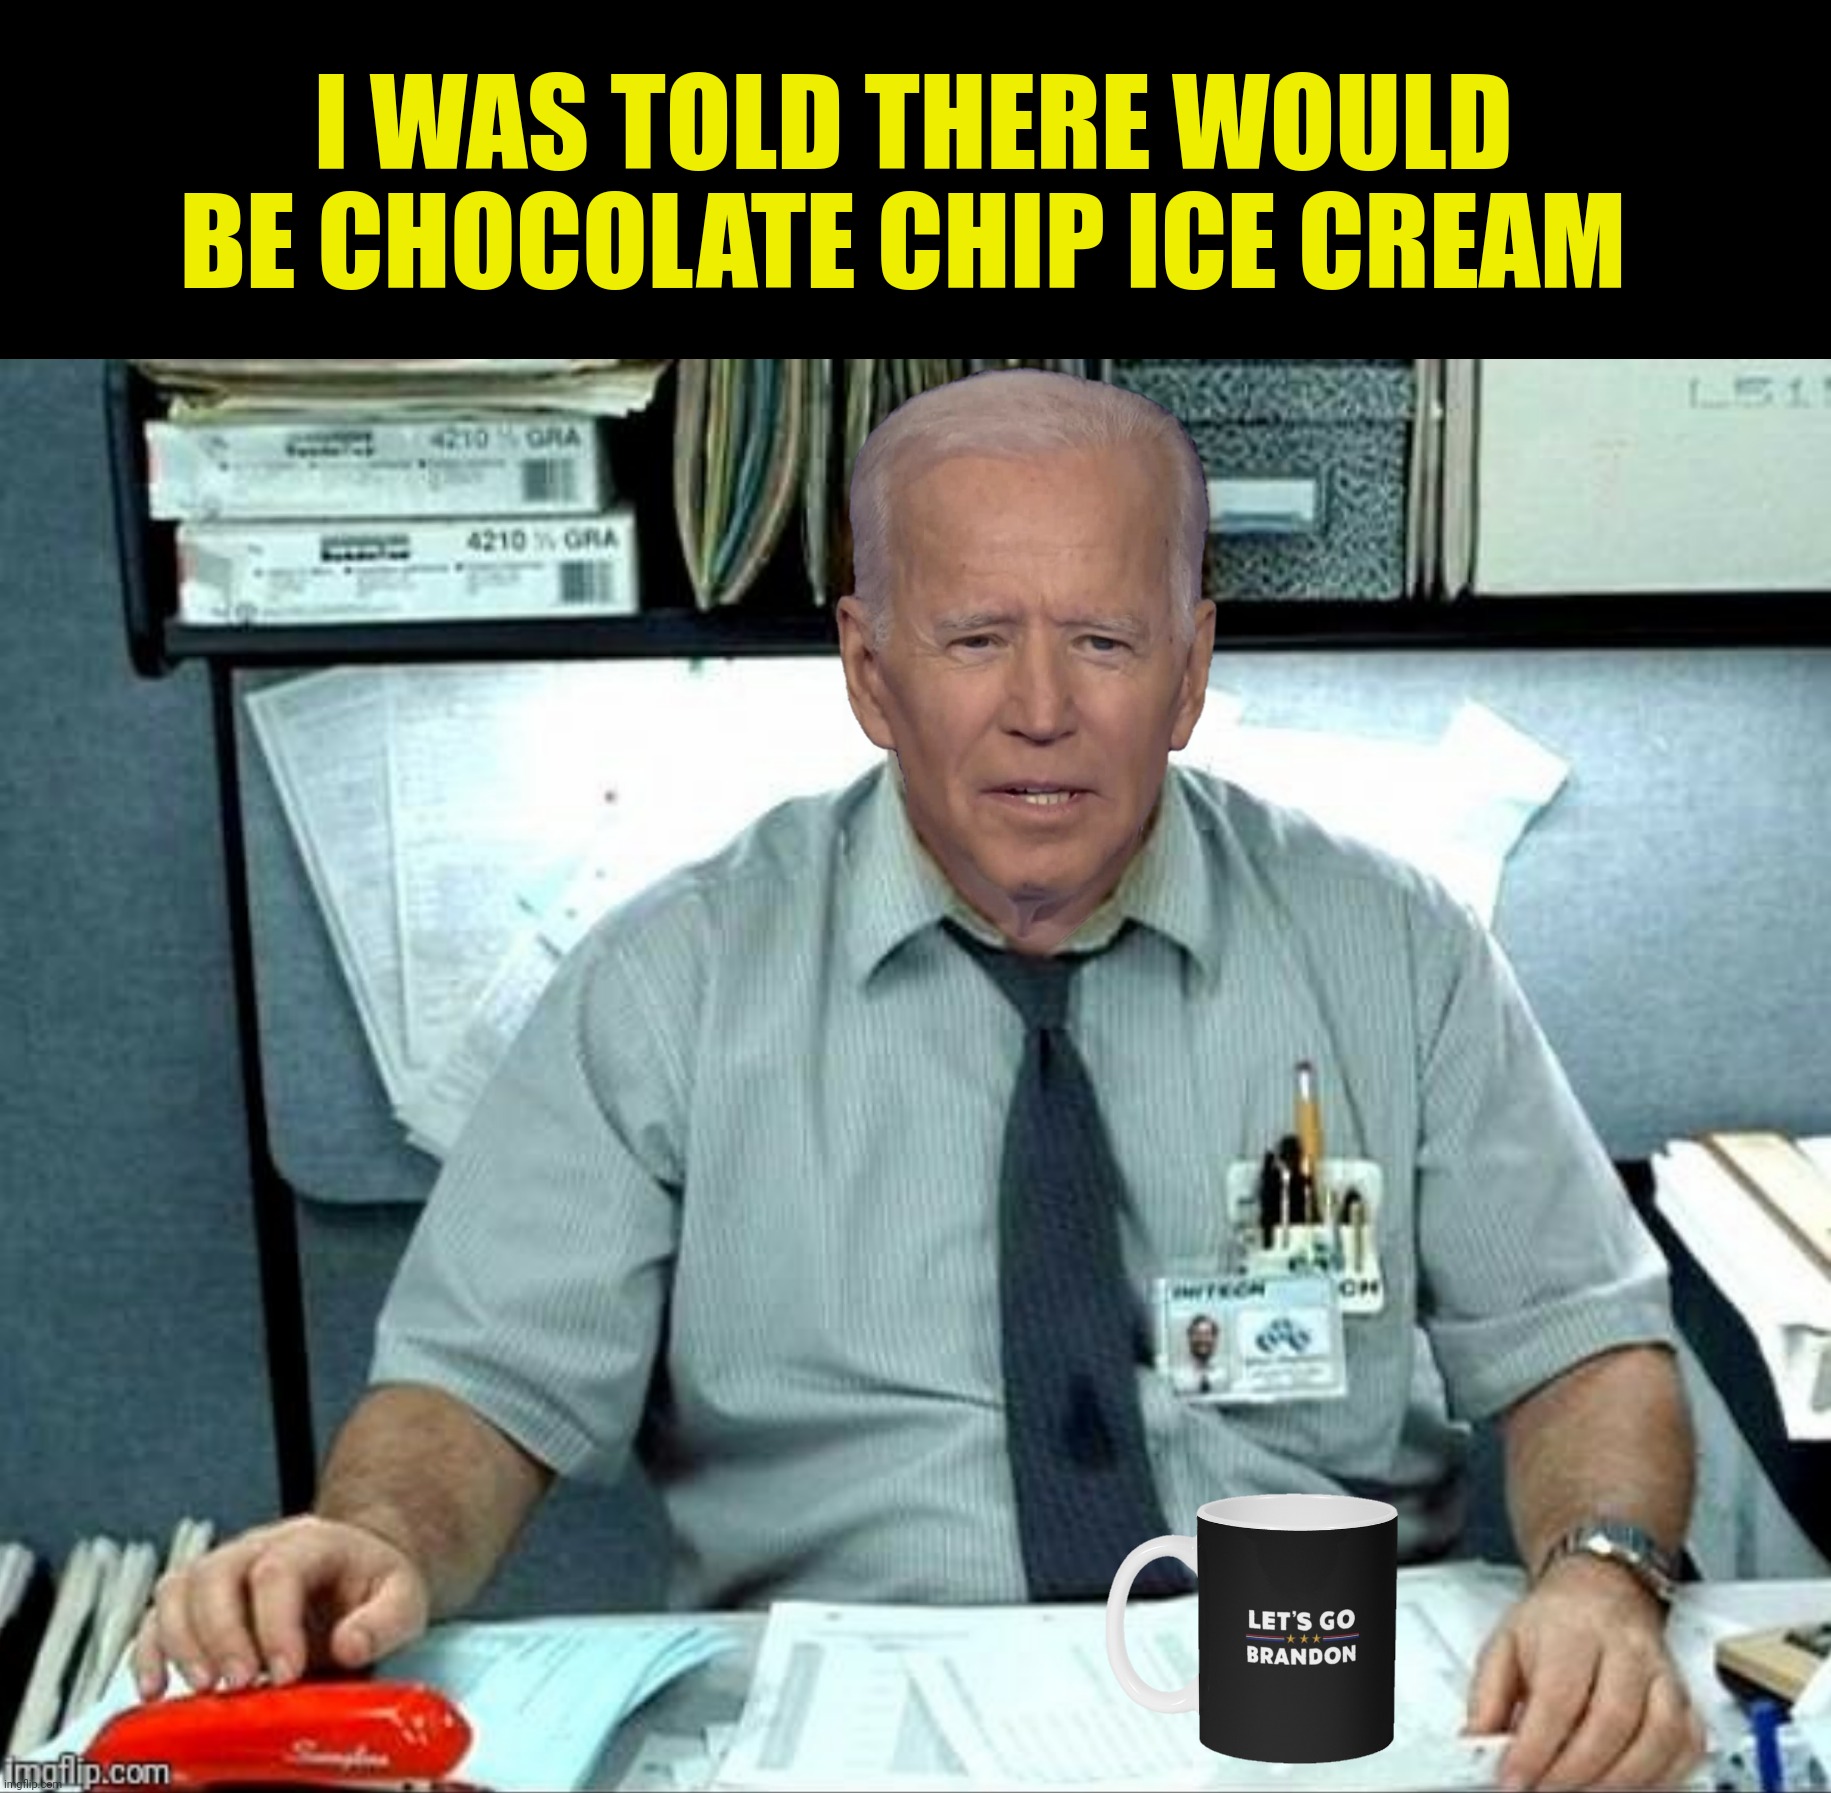 Priorities | I WAS TOLD THERE WOULD BE CHOCOLATE CHIP ICE CREAM | image tagged in bad photoshop,joe biden,office space,ice cream | made w/ Imgflip meme maker